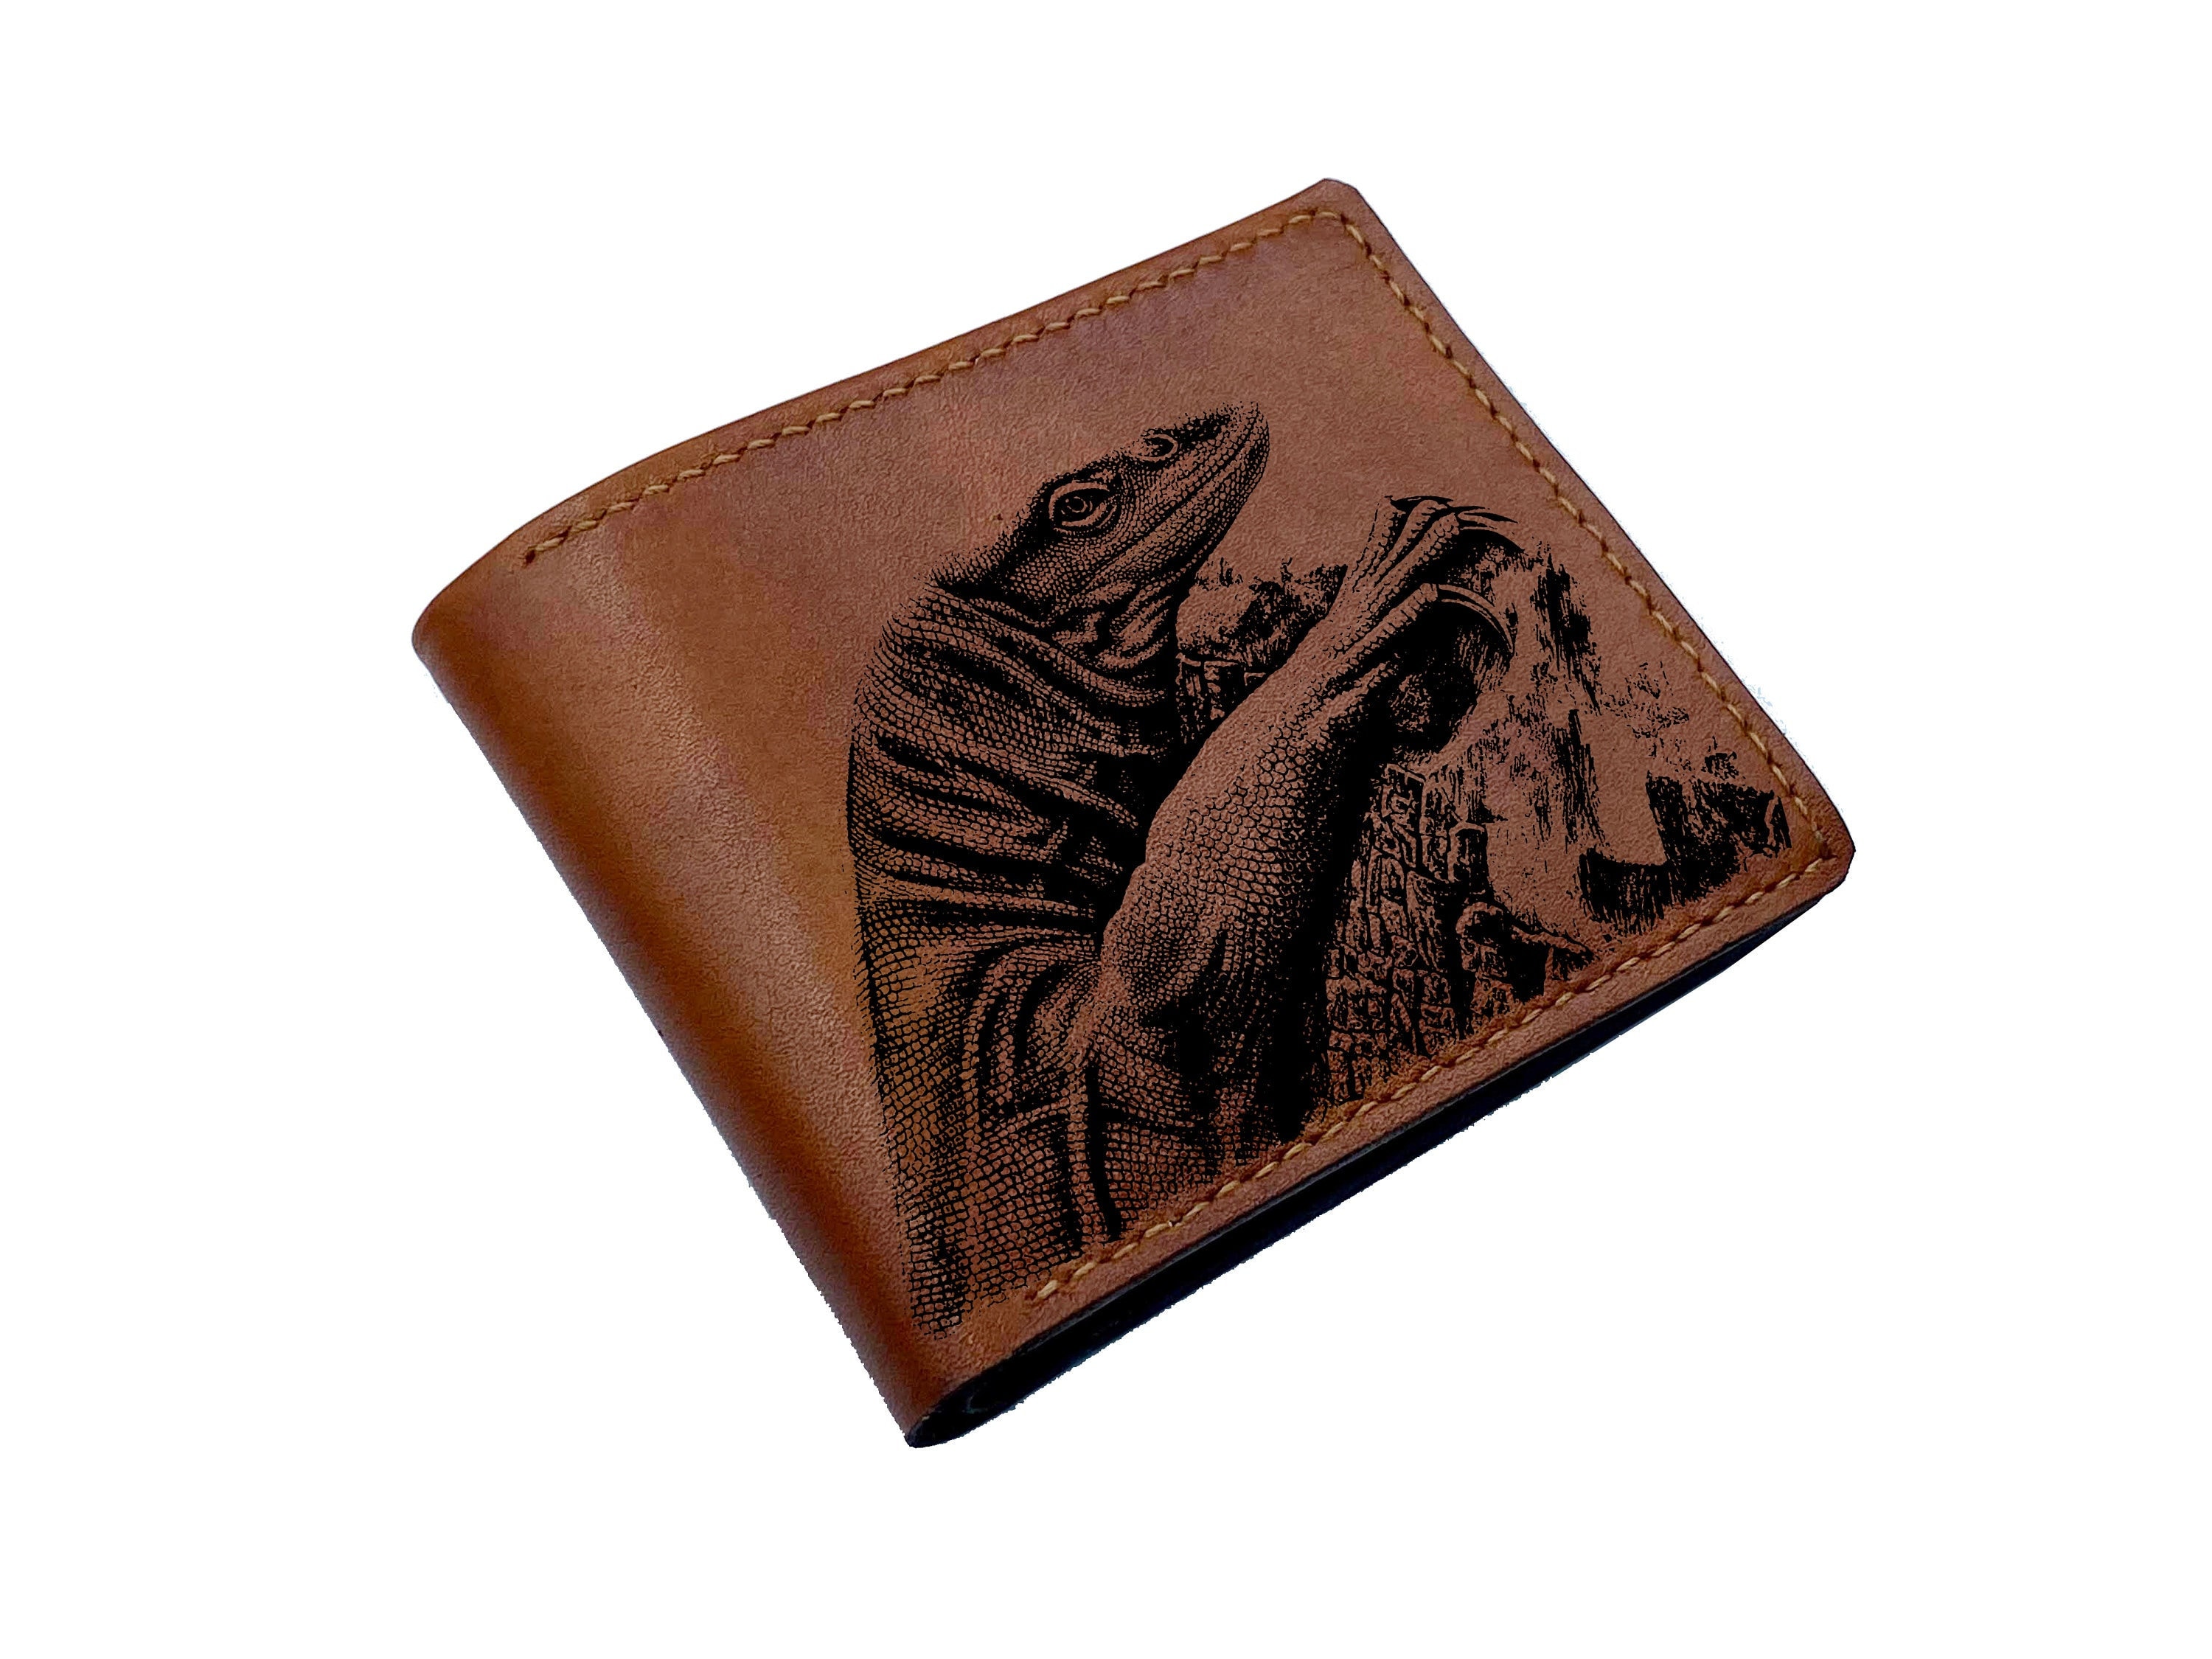 Tibaldi Leather Wallet, Black, Leather, Cotton, 6 Cards, LTM-OWALL - Iguana  Sell